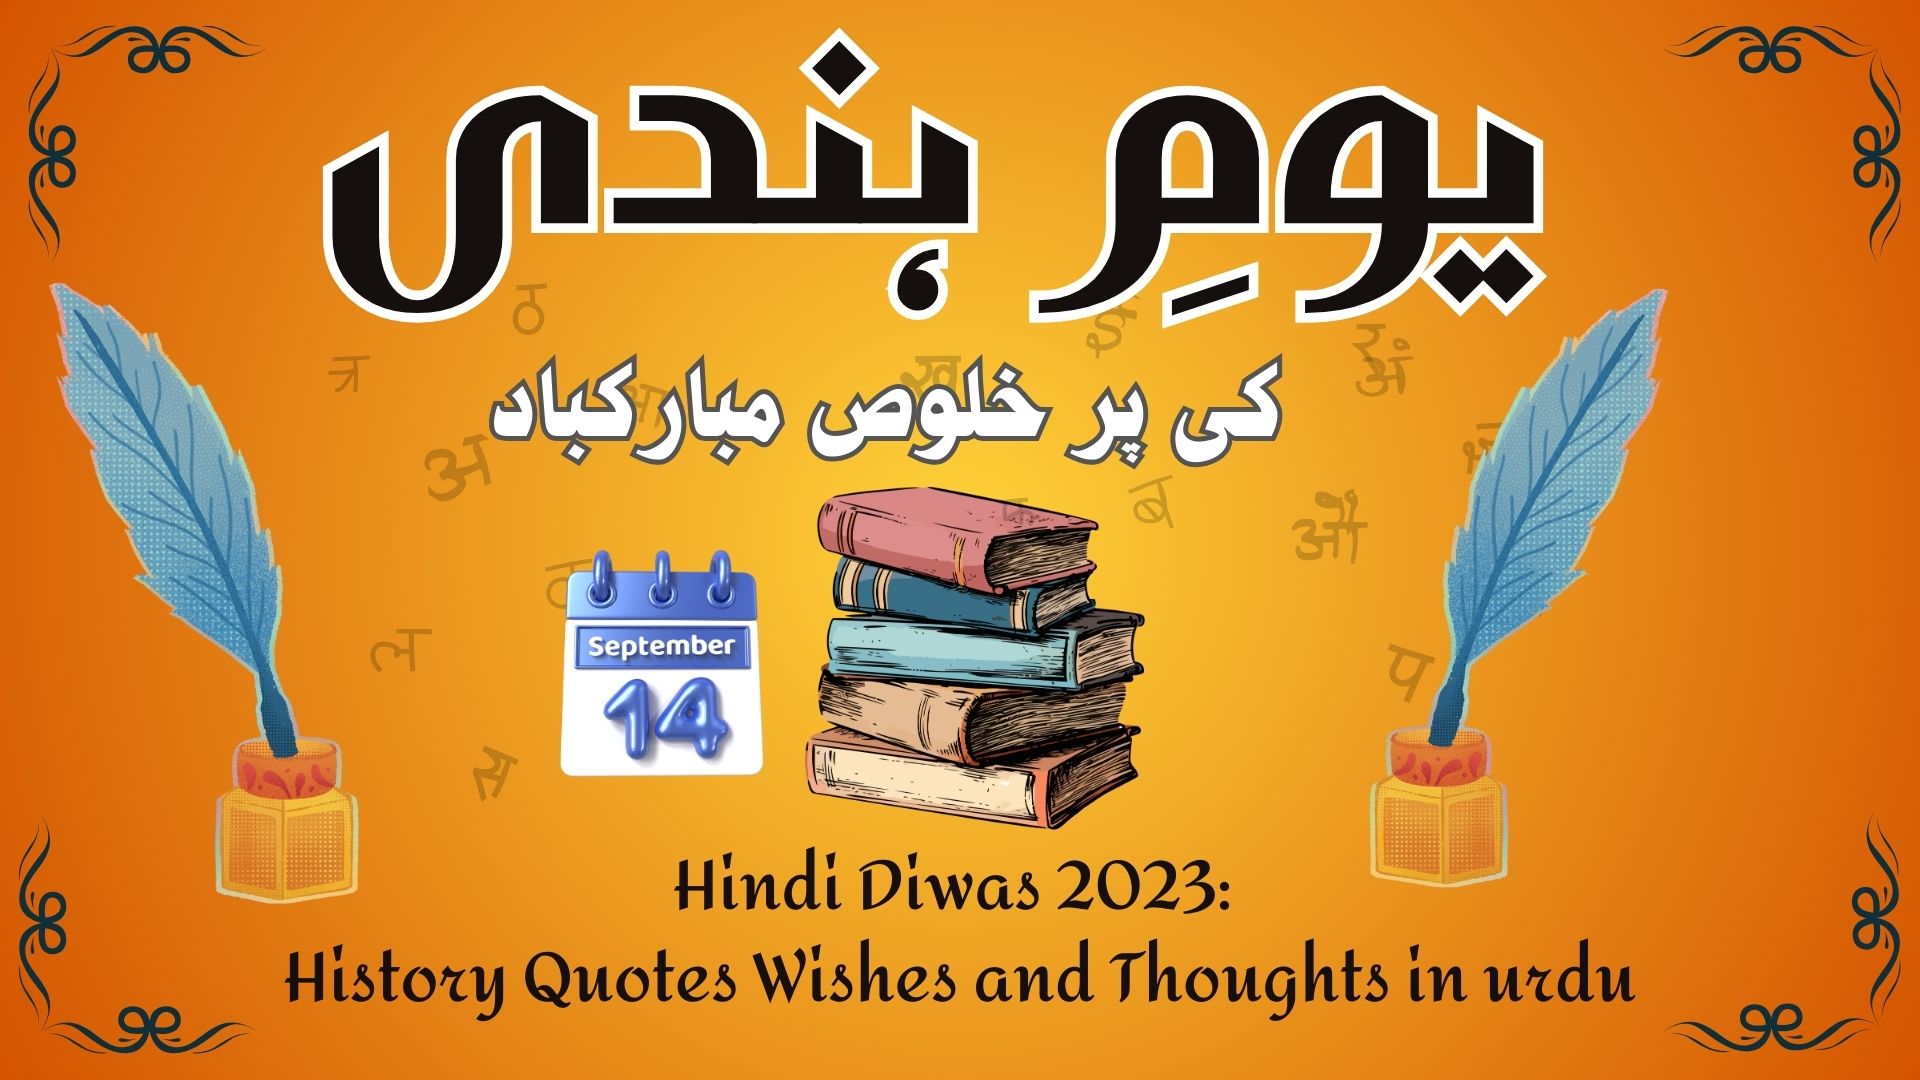 Hindi Diwas 2023: History Quotes Wishes and Thoughts in urdu